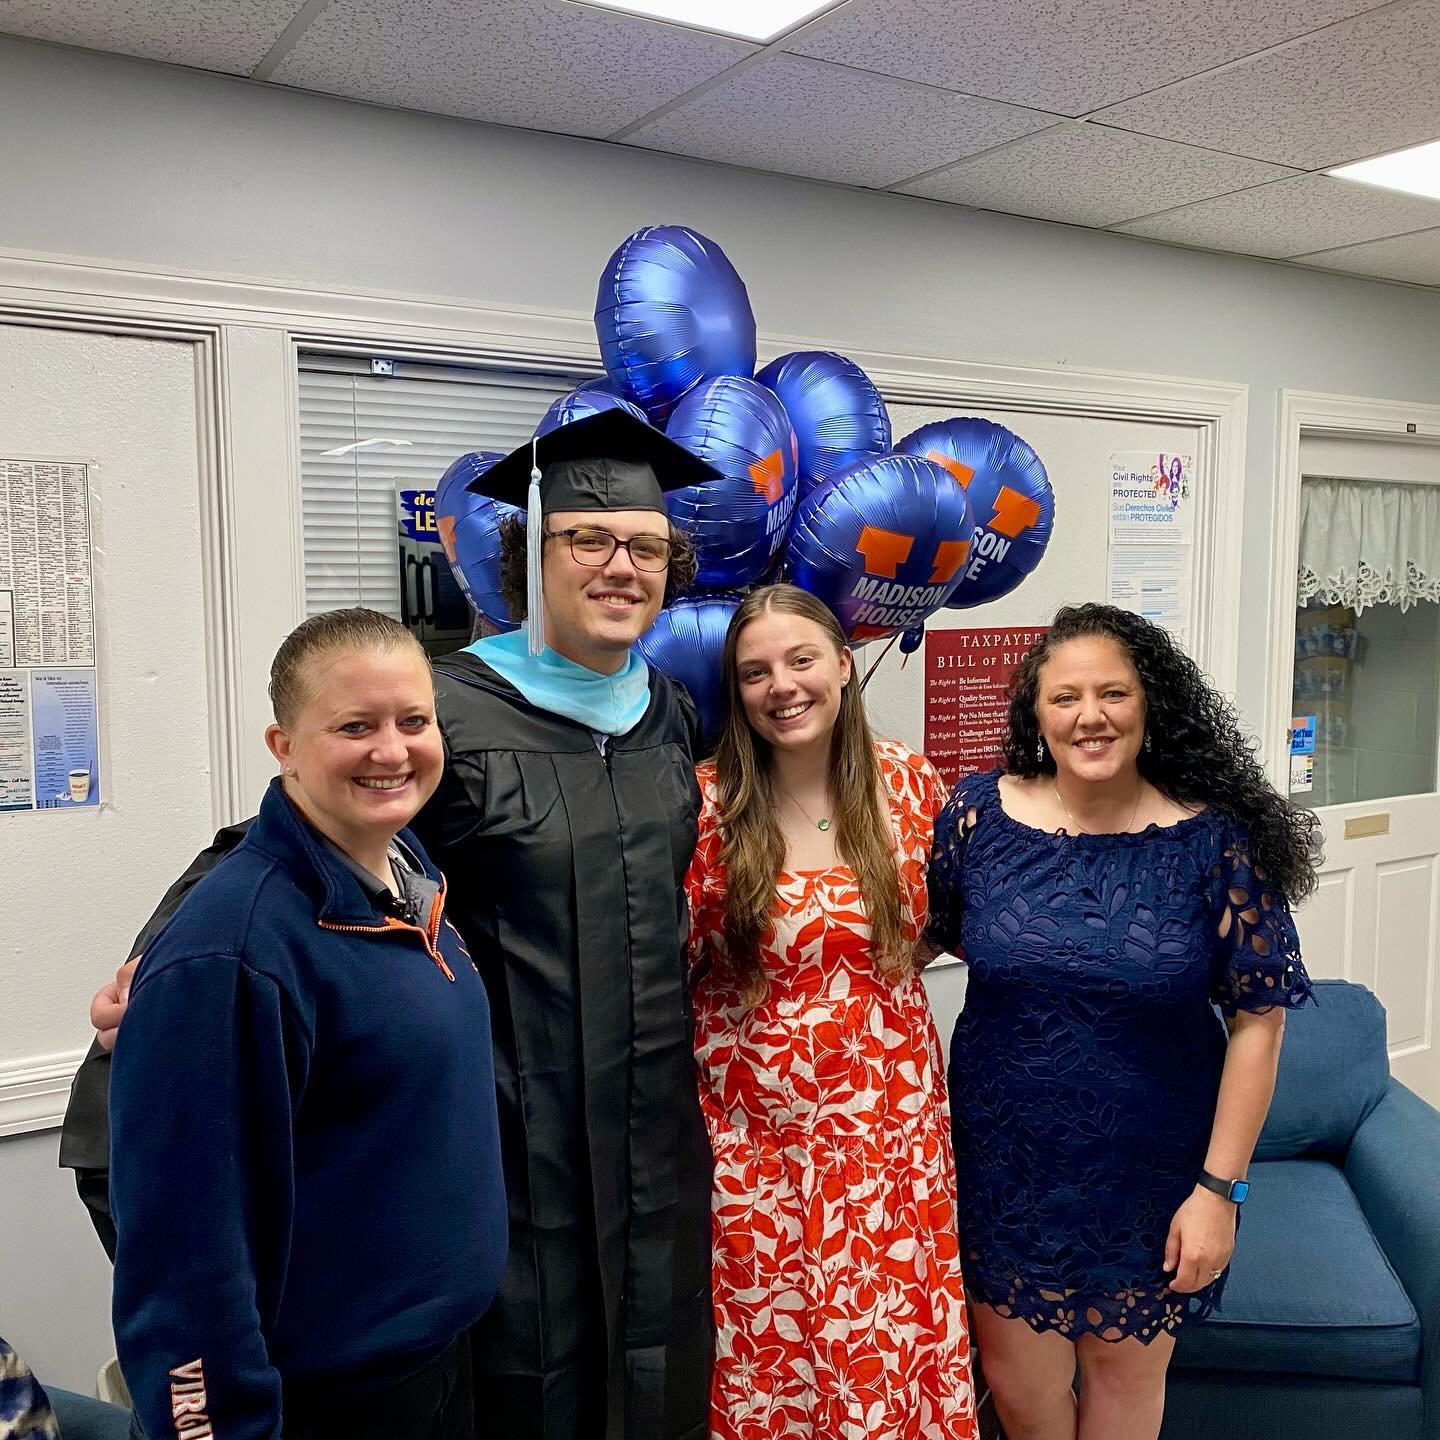 No rain can steal our sunshine! ☀️ We are celebrating all of our amazing Madison House volunteers graduating from @uva today! 🎓 May the road rise to meet you in all of life&rsquo;s journeys. We wish you great joy and happiness! 💙🧡
.
.
.
#HoosHooSe